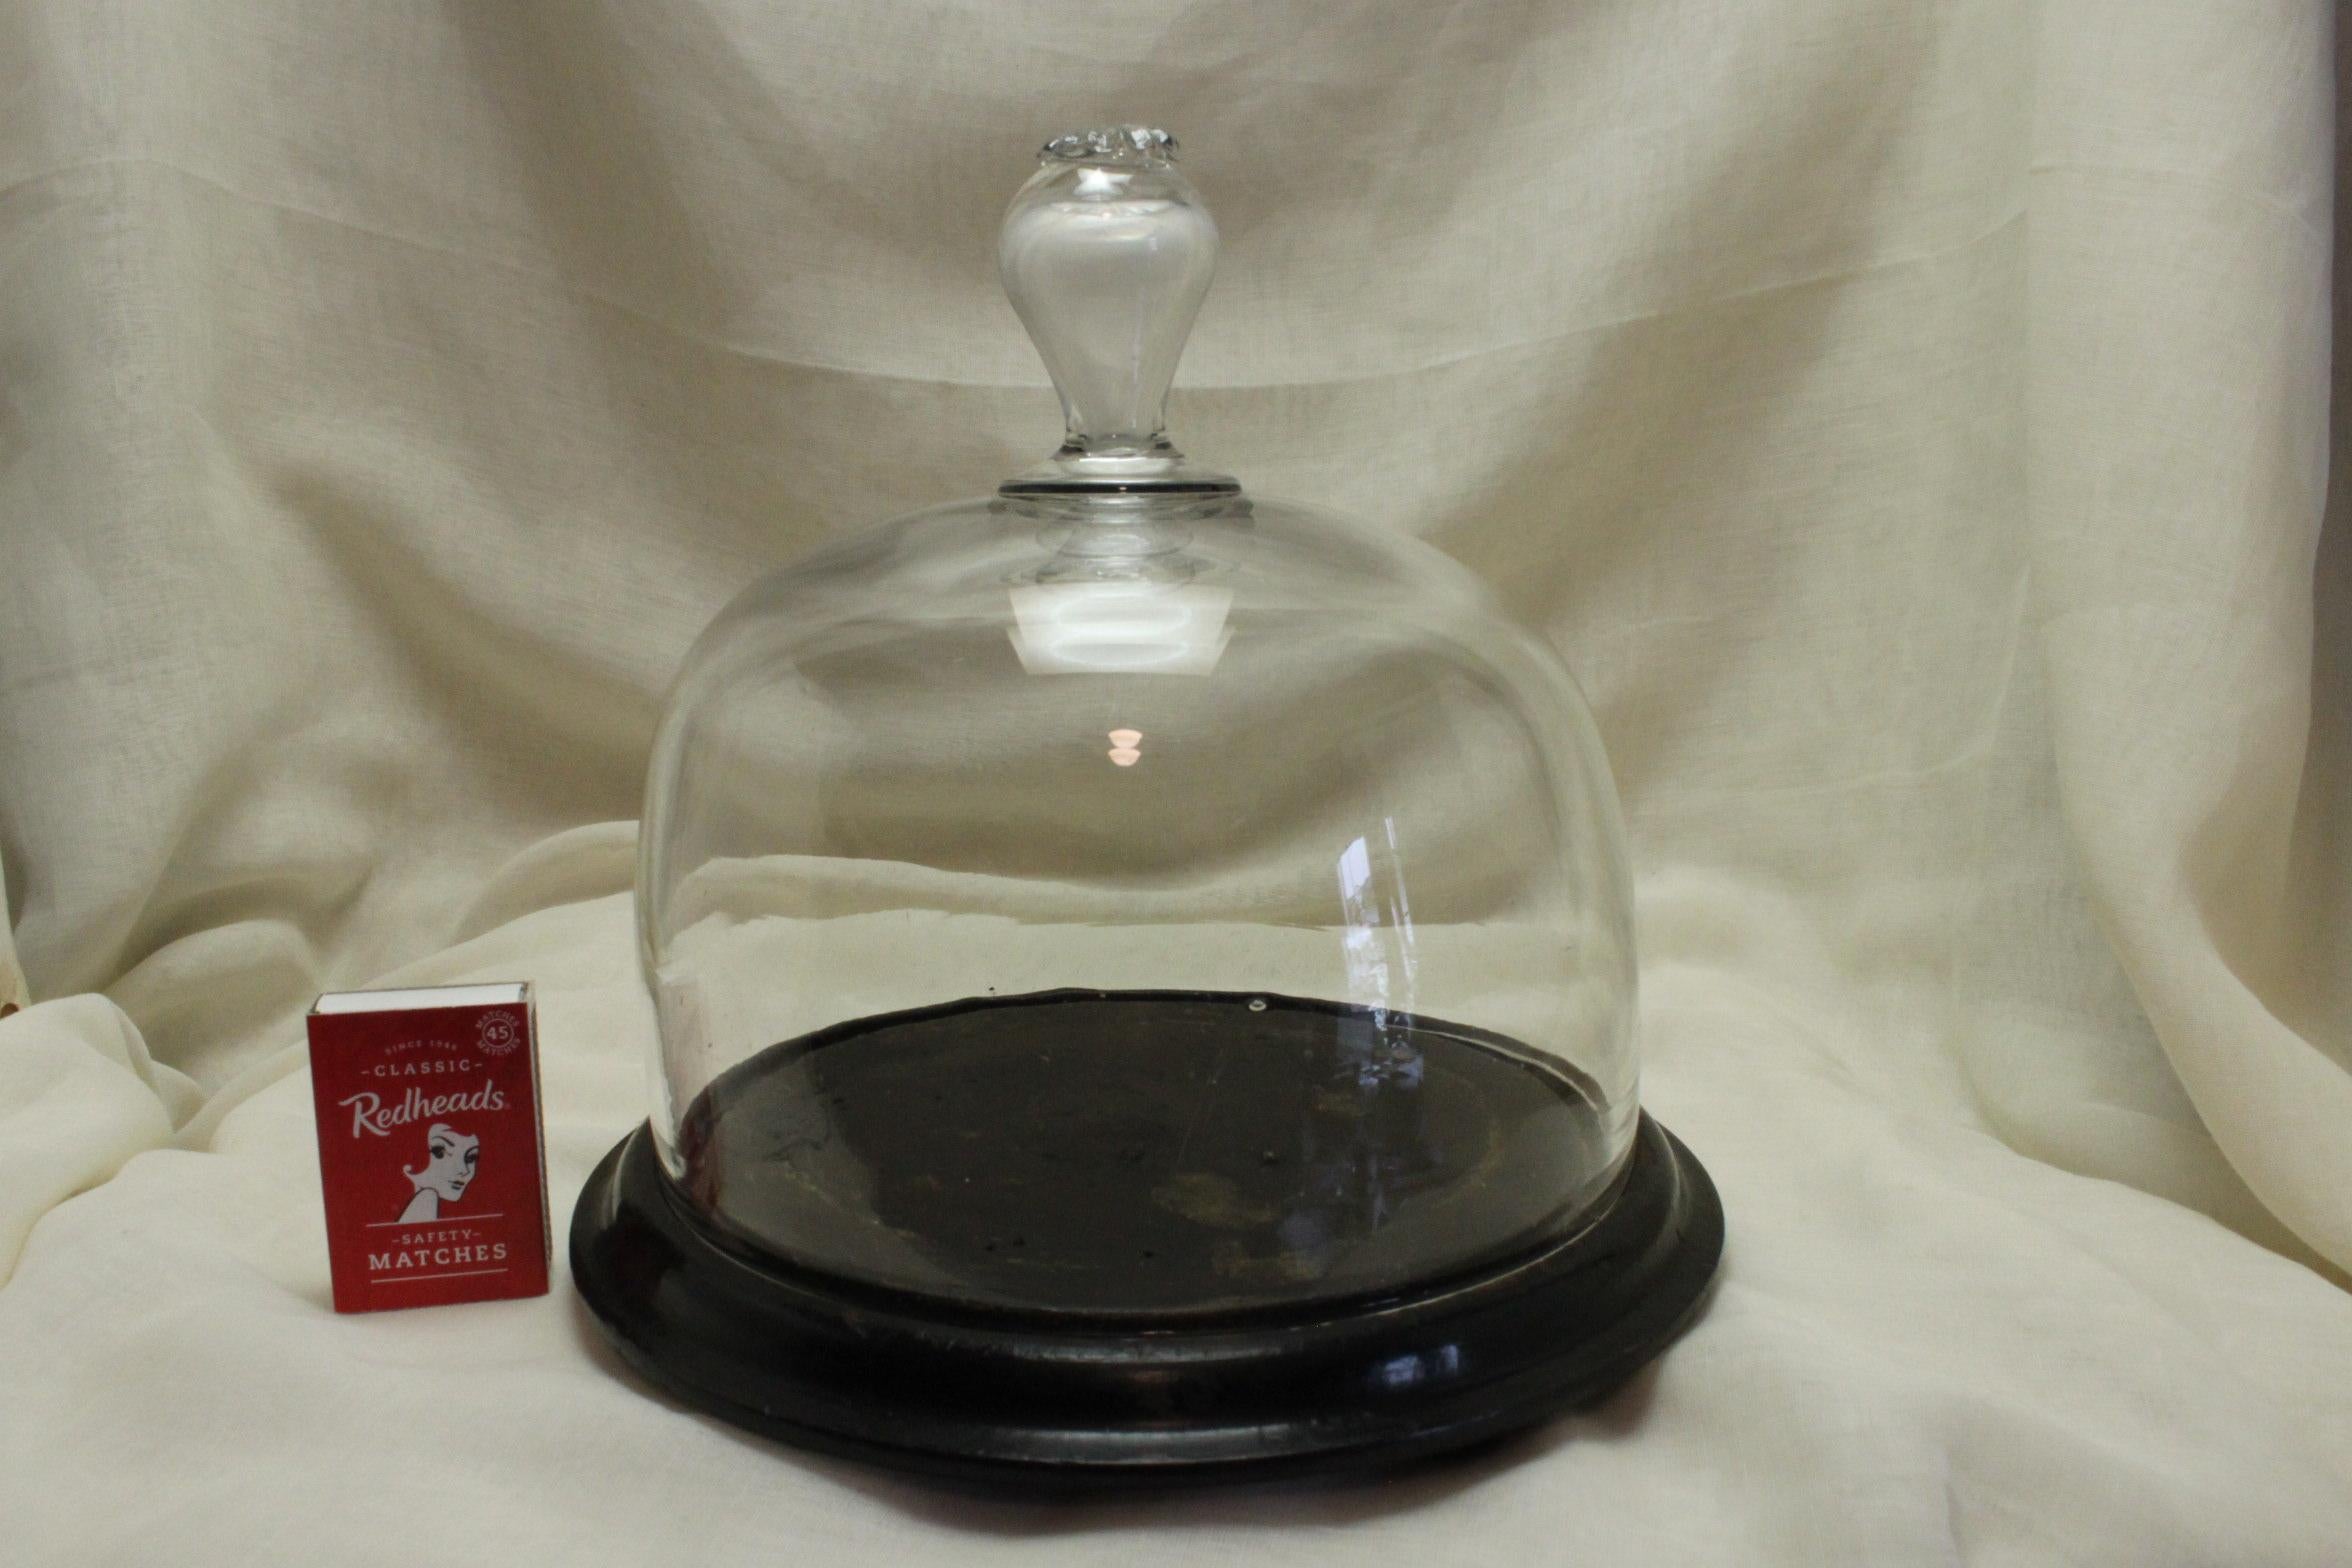 This French glass food dome or cloche, sits on a wooden stand and was used to display or cover food. The hand blown dome measures 180 mm (7.25 inches) in height and has a diameter of 175 mm (7 inches). Sitting on the stand the height is 195 mm (7.75